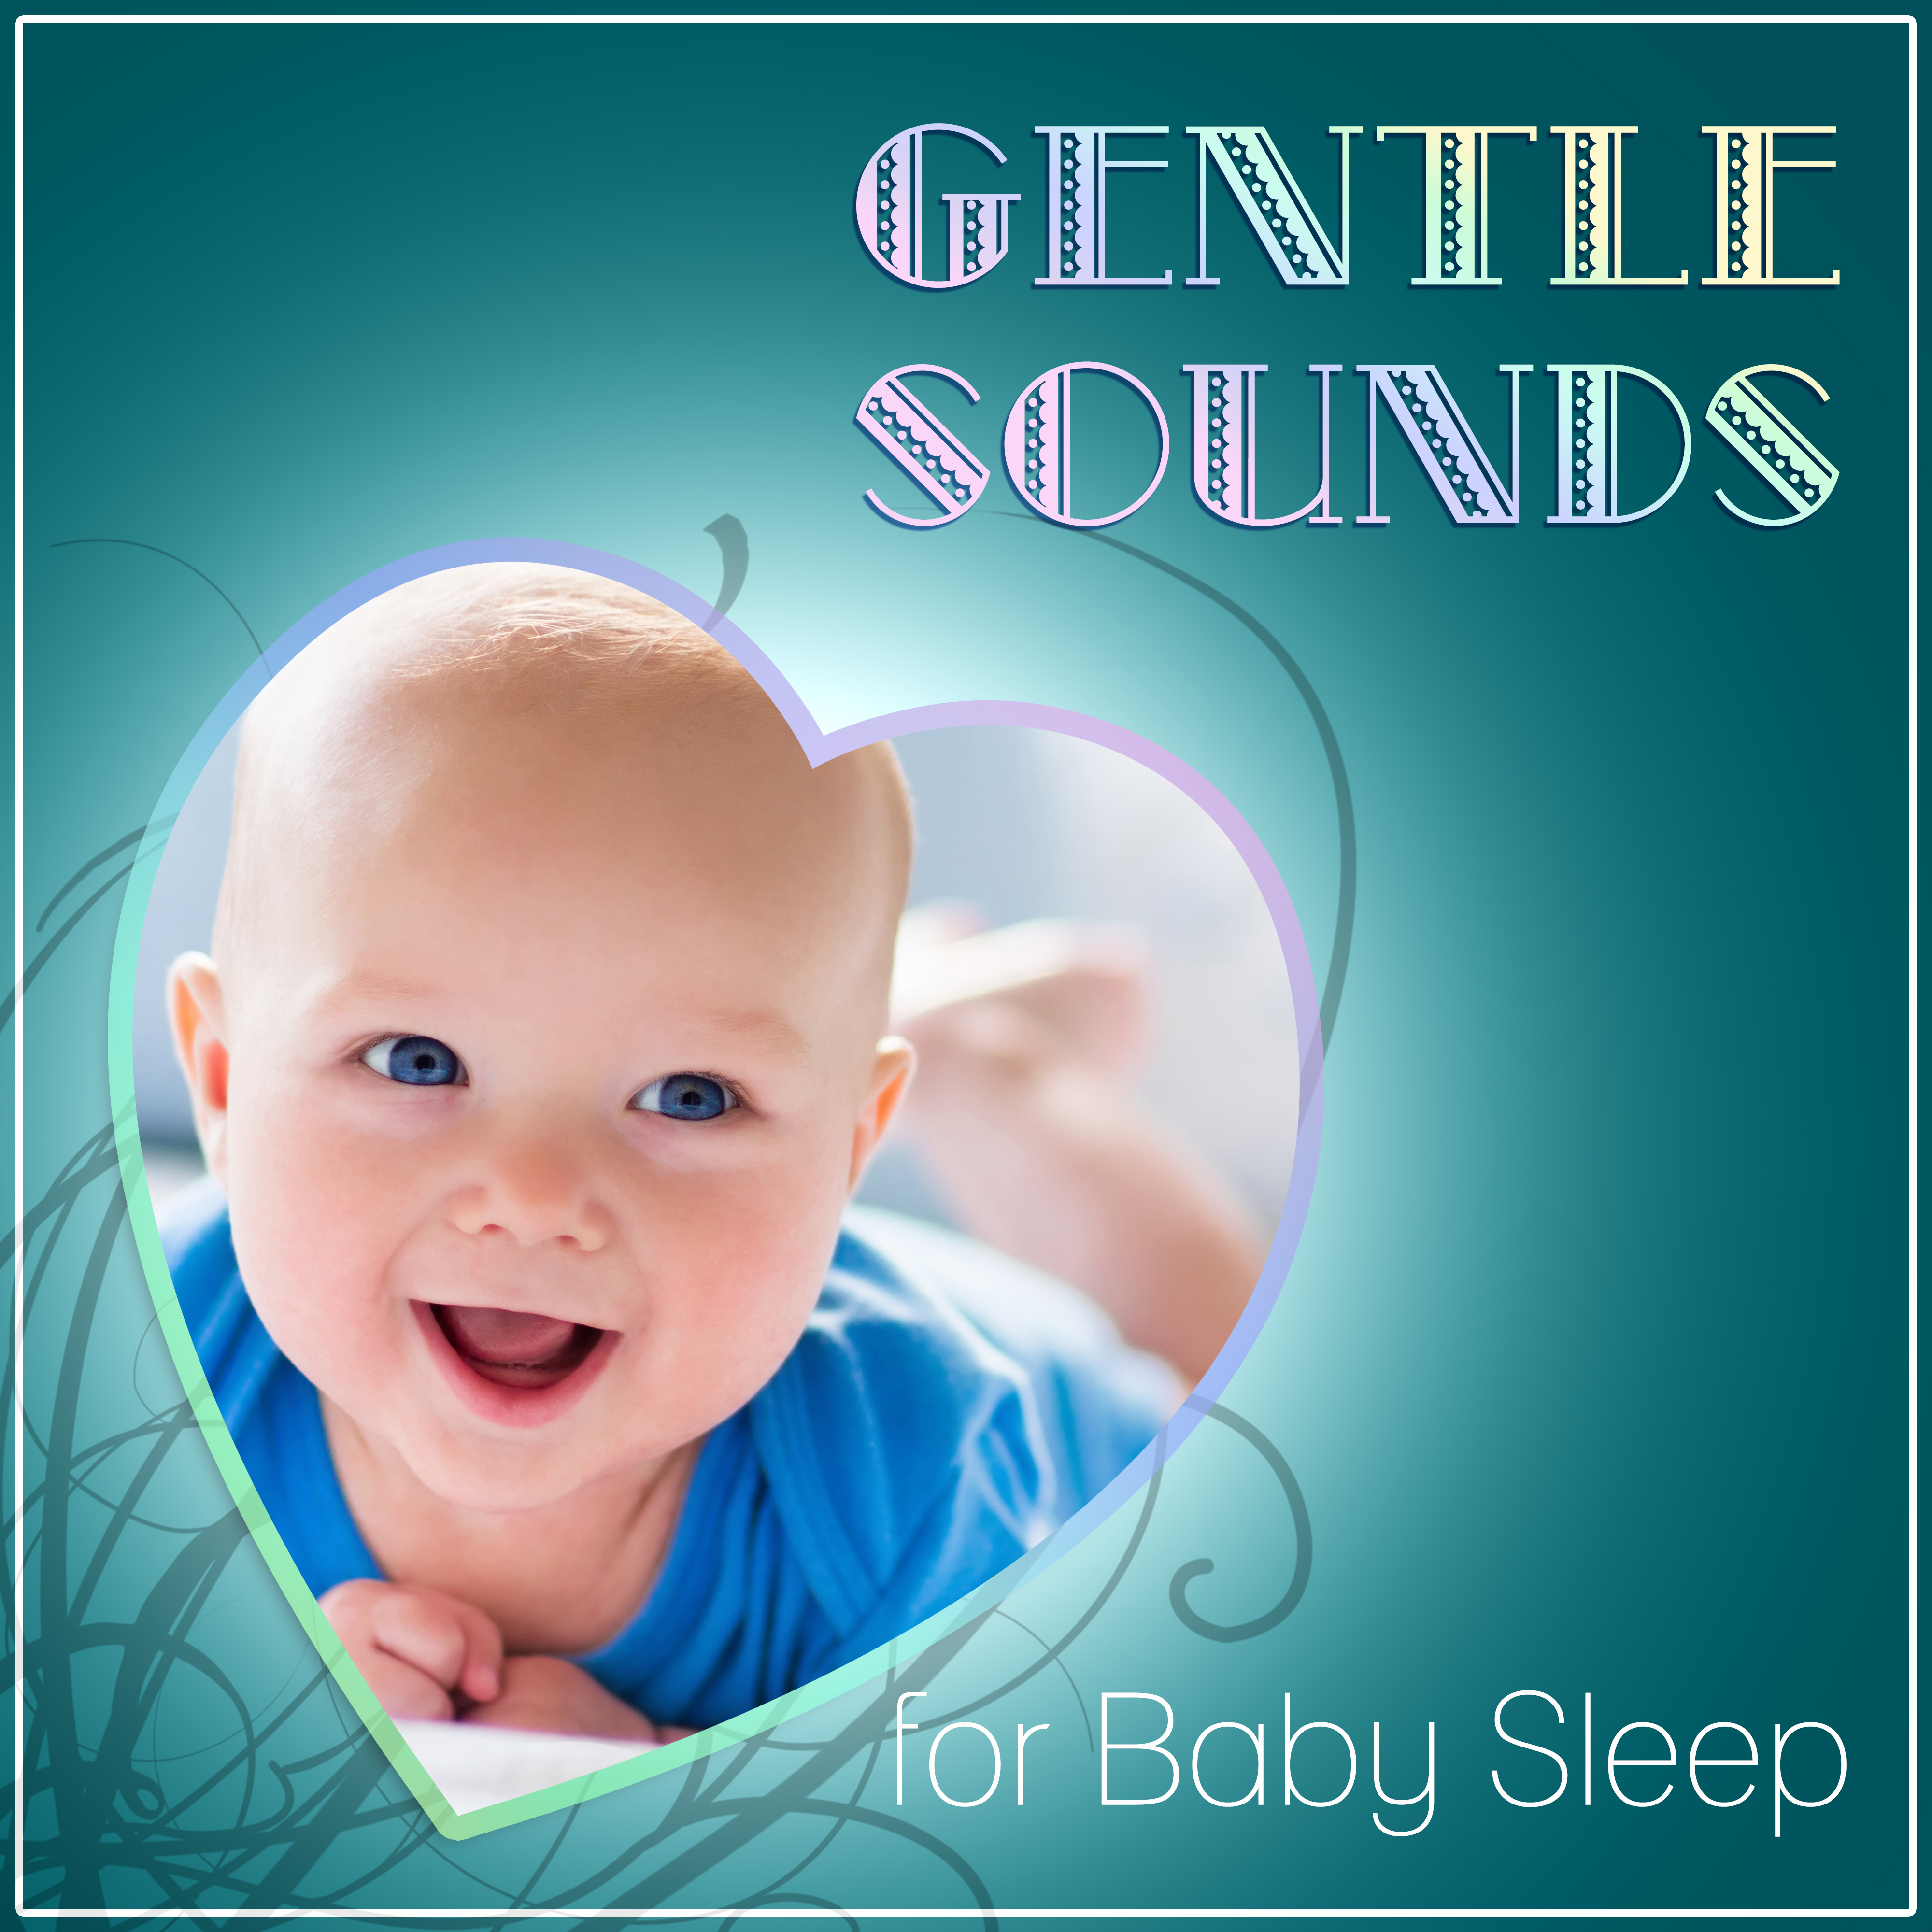 Gentle Sounds for Baby Sleep - Baby Soothing Lullabies, Baby Sleeping, Sounds of Ocean Waves & Rain, Relaxing Nature Music, Peaceful Piano Music